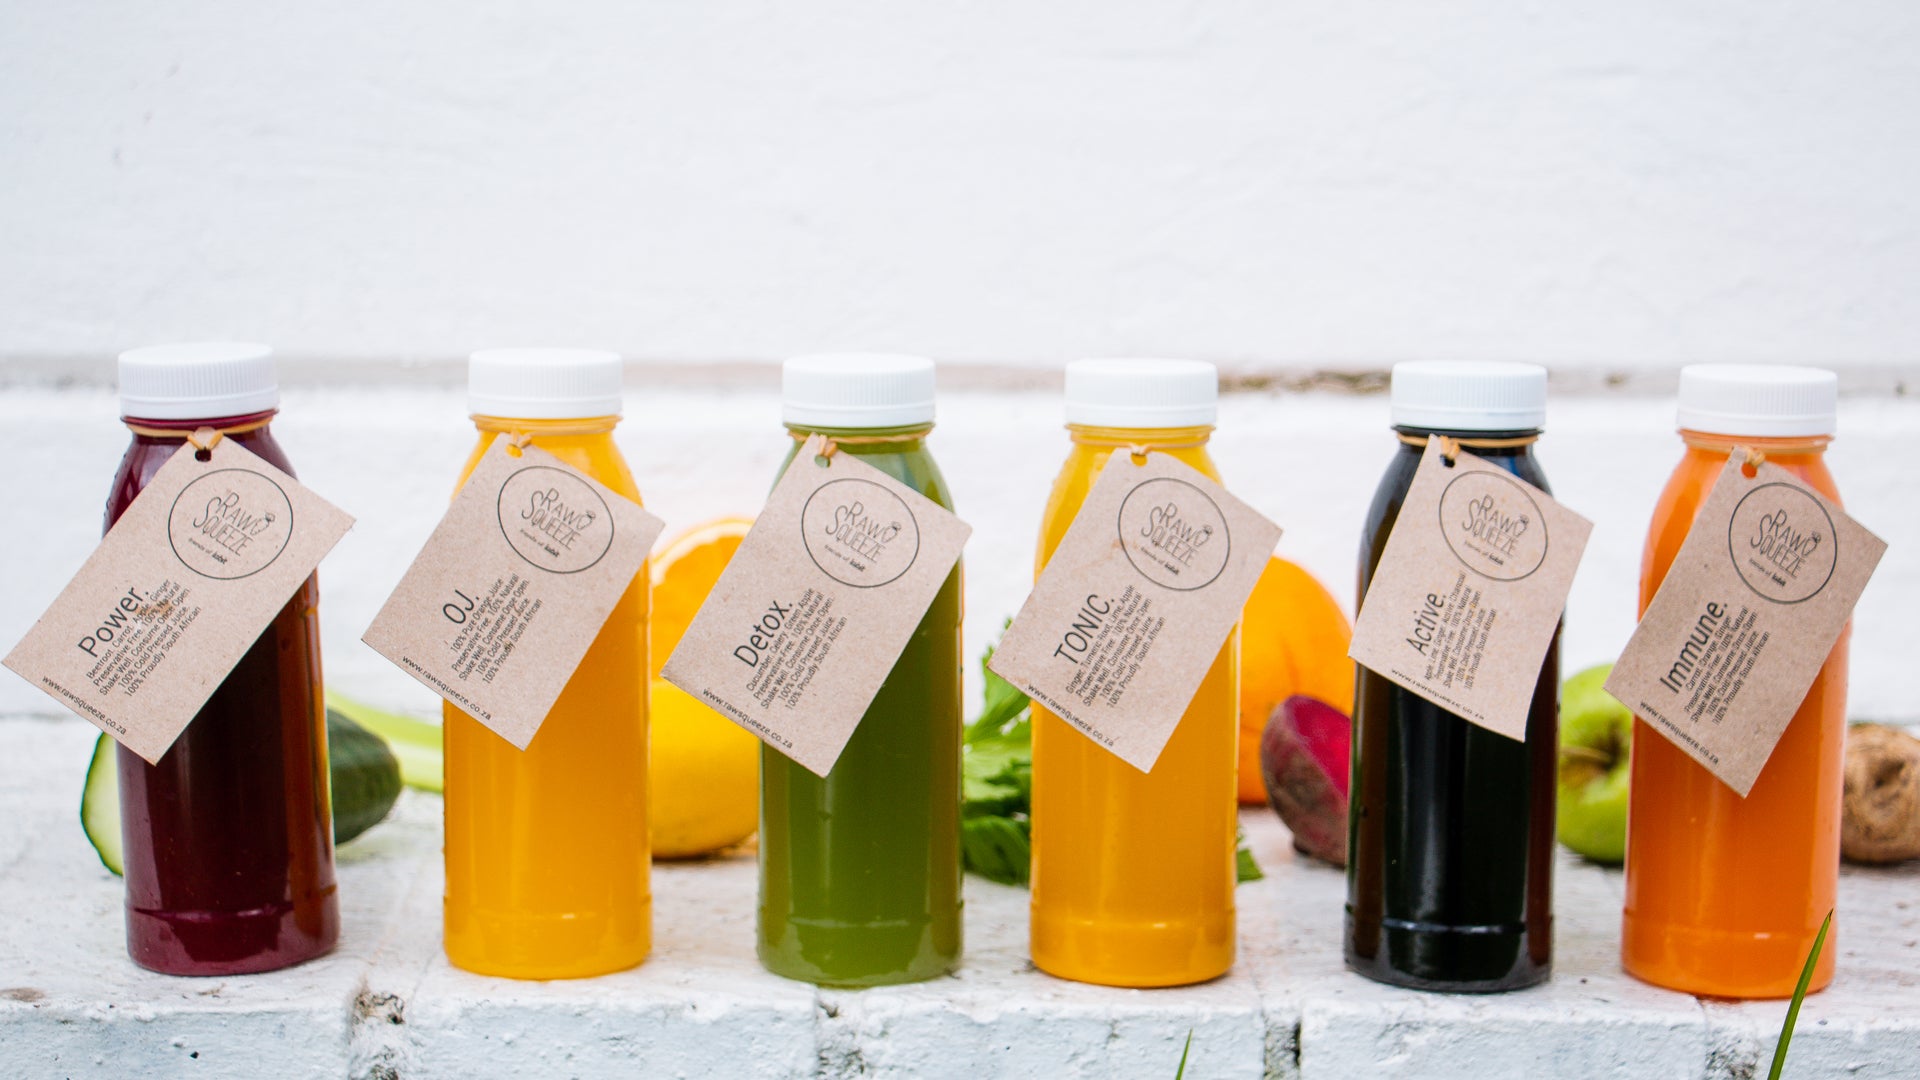 100% Cold Pressed Raw Juices